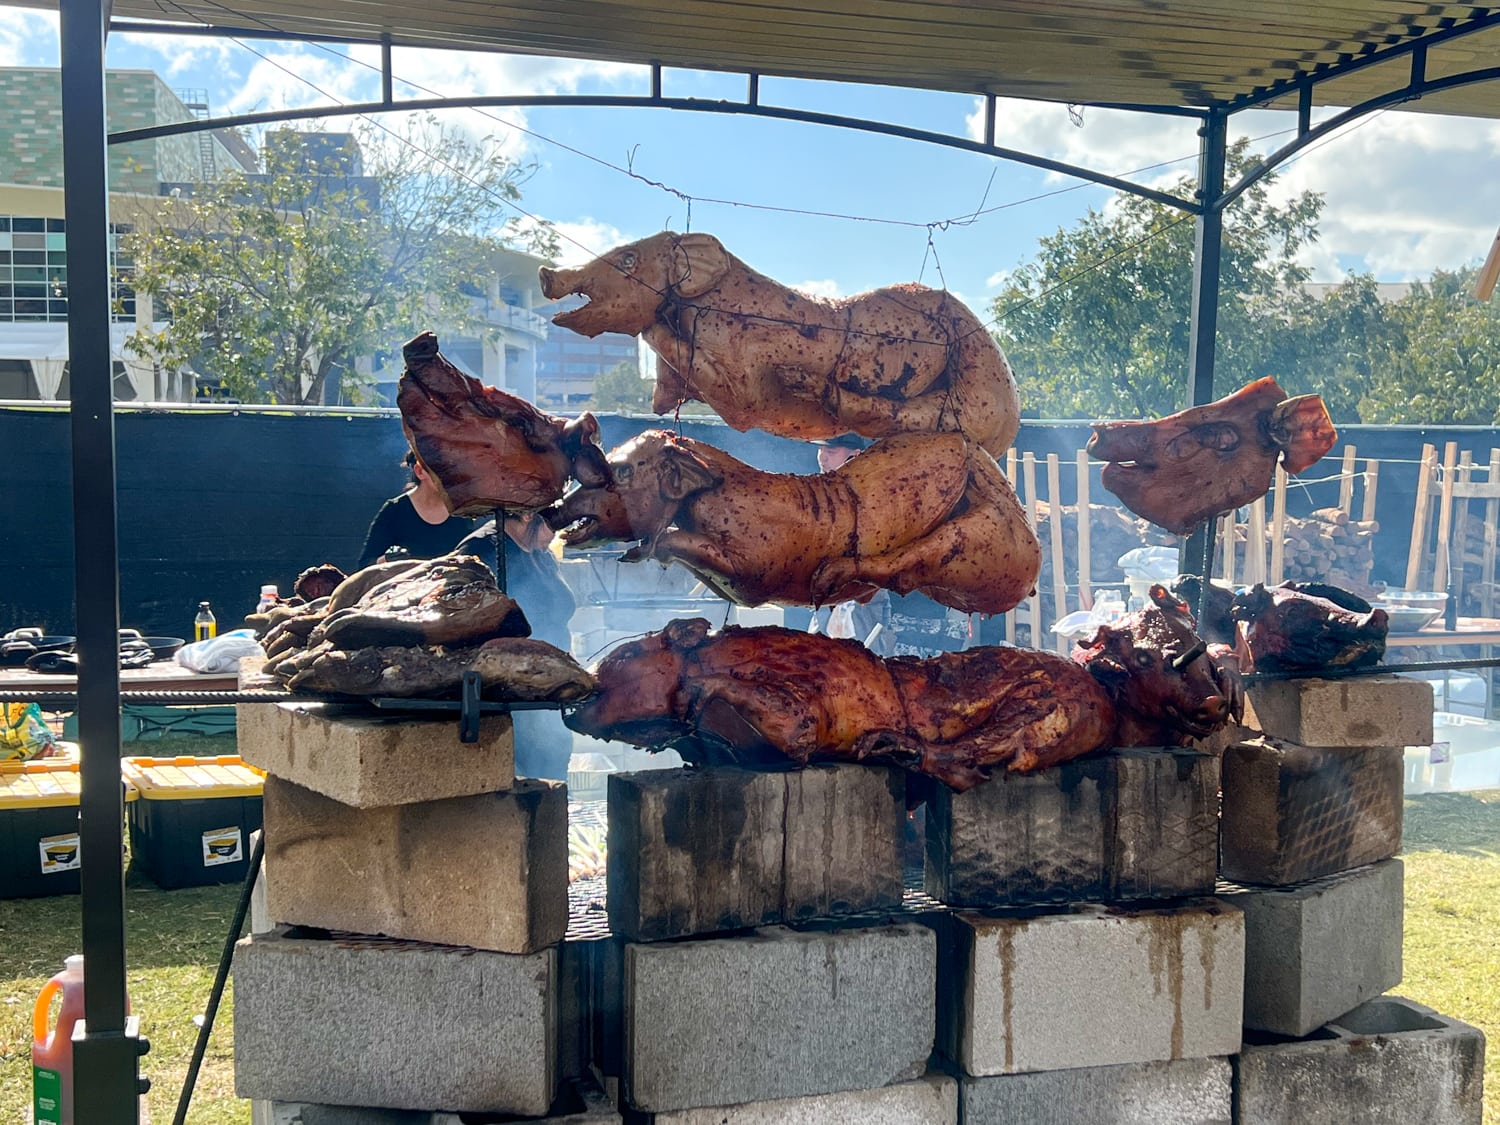 Pigs roasting at the Fire Pit, a popular area of the Austin Food and Wine Festival in 2022